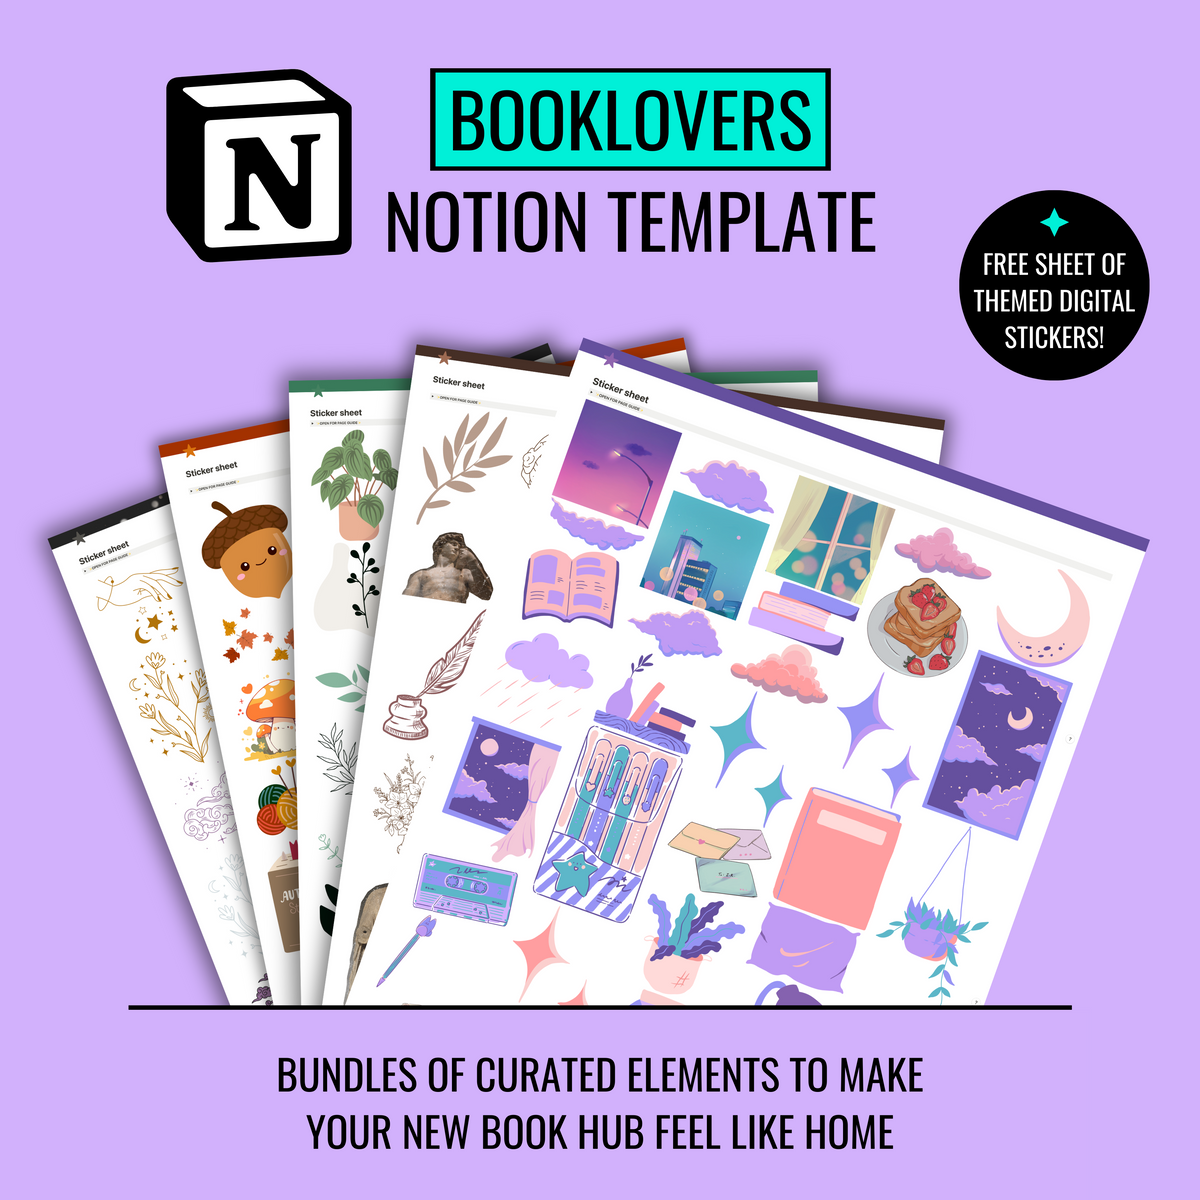 Complete library hub Notion template